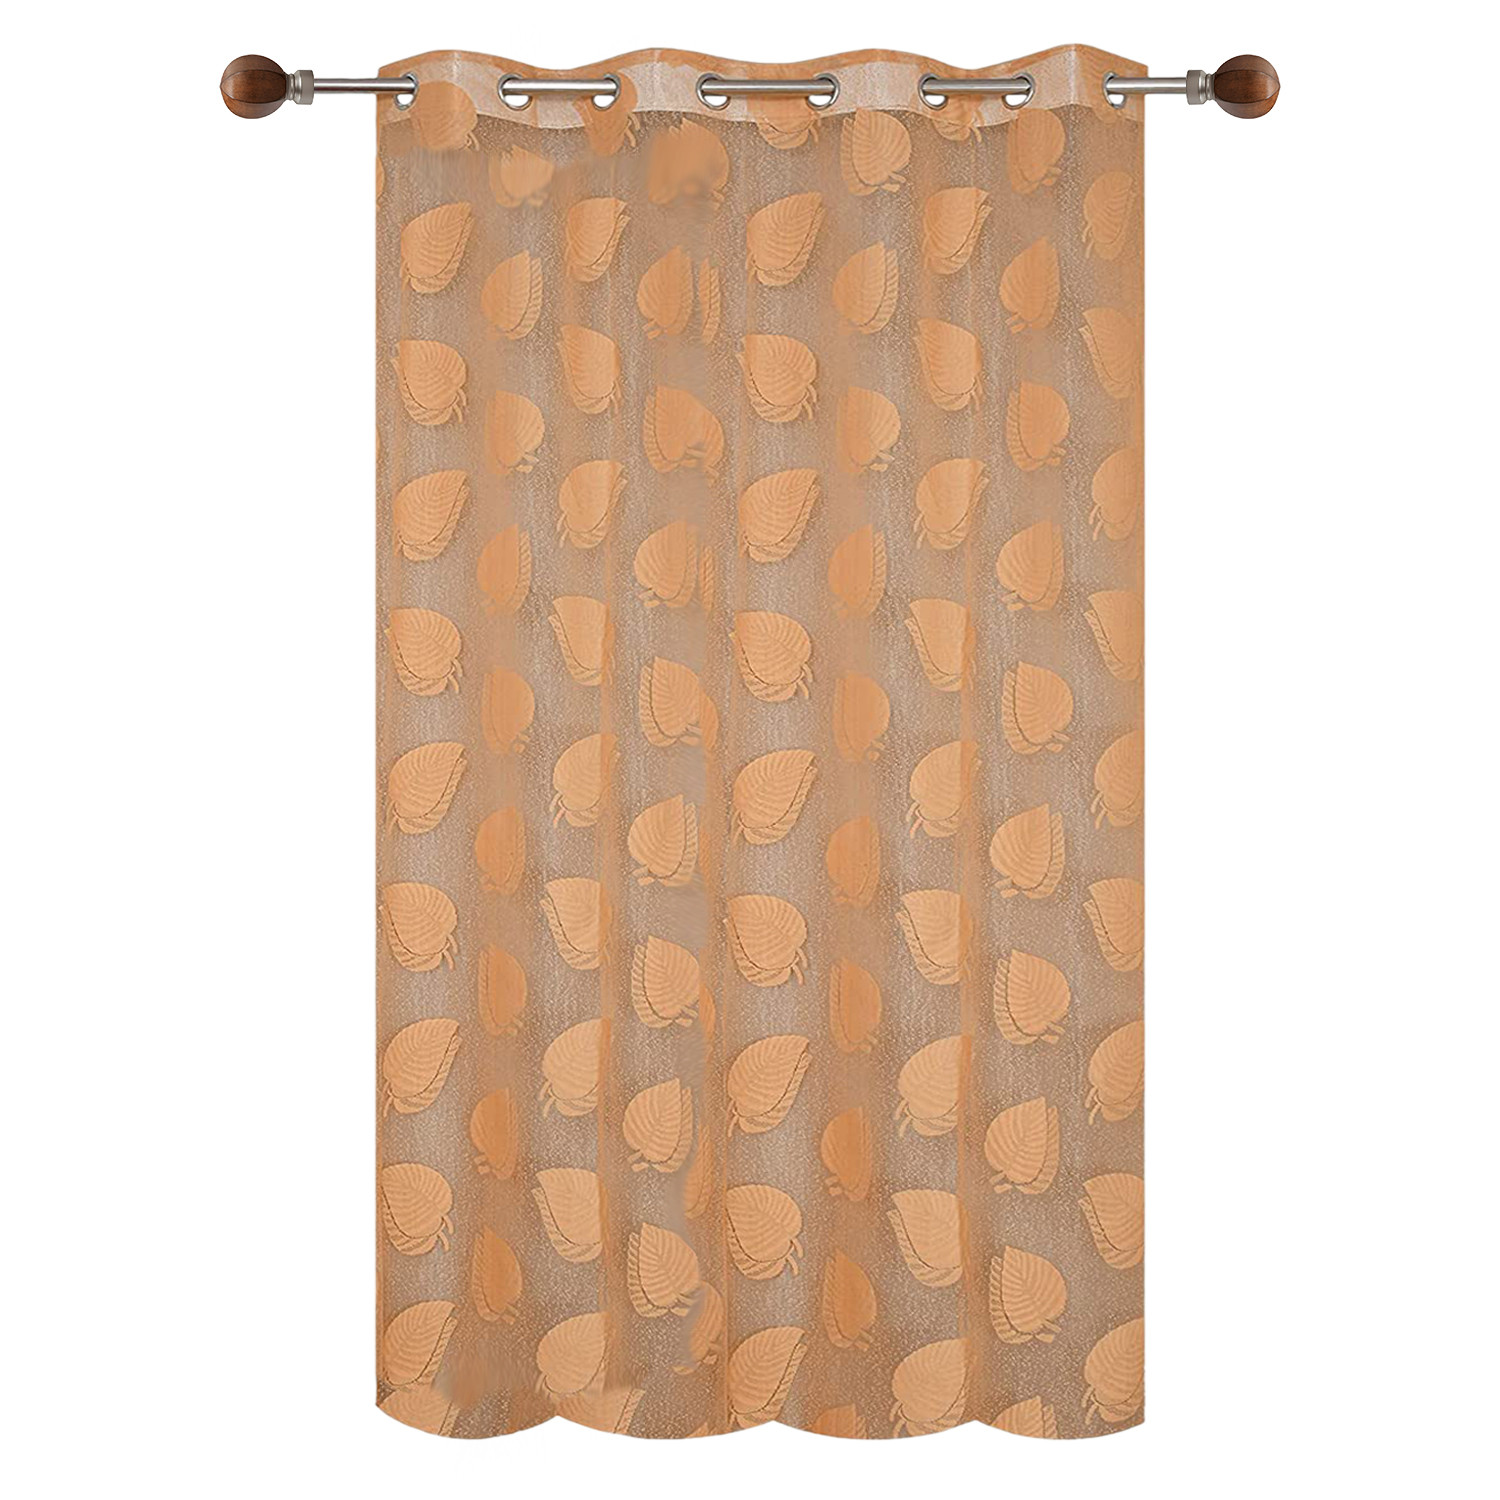 Kuber Industries Leaf Print Home Decor Cotton Door Curtain With 8 Eyeletss, 7 Feet (Brown)